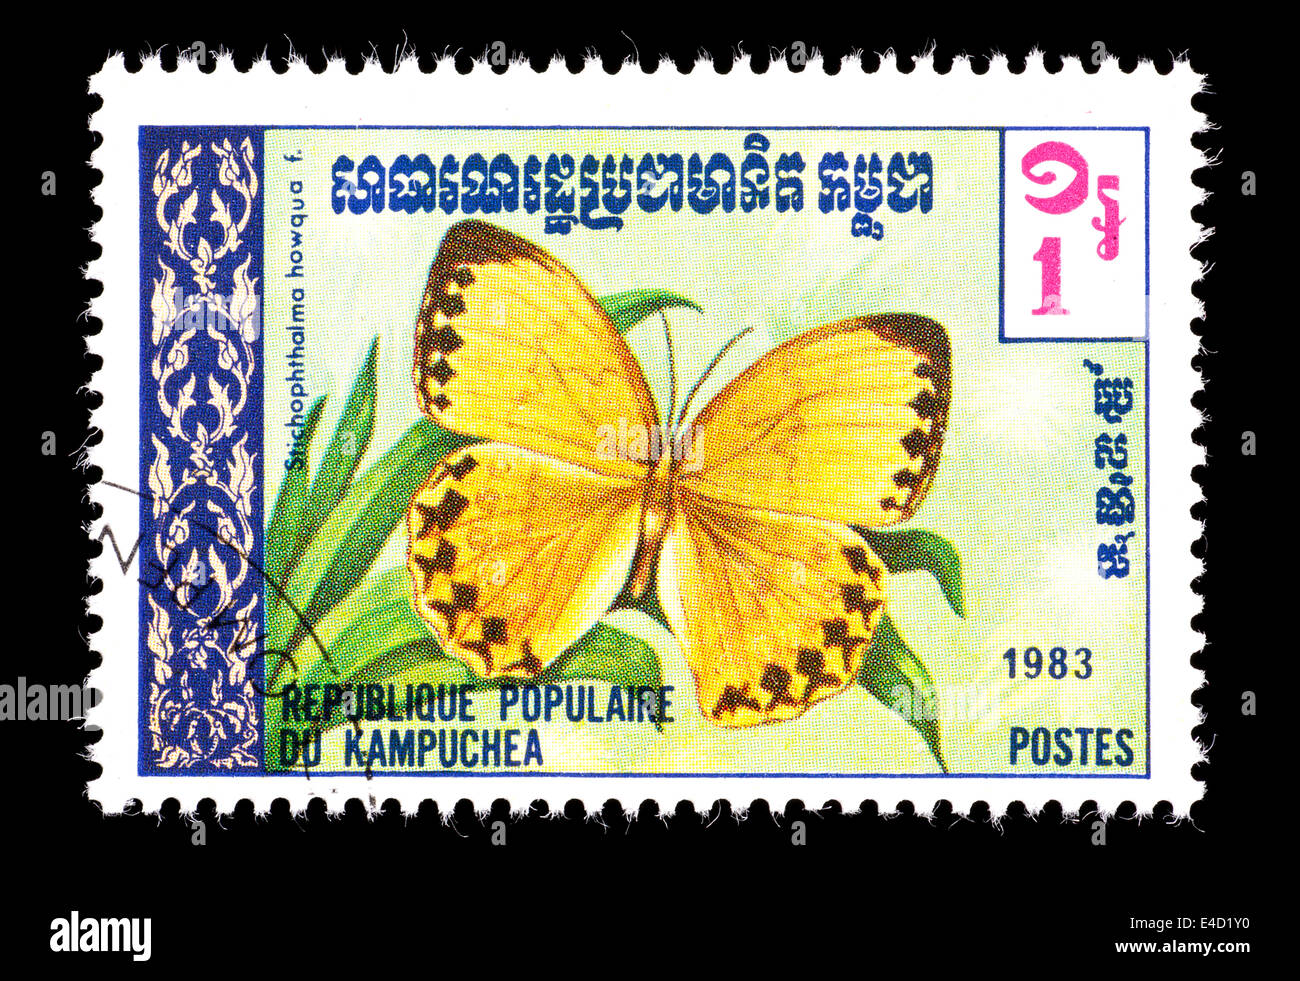 Postage stamp from Kampuchea depicting a small tropical butterfly (Stichophthalma howqua) Stock Photo